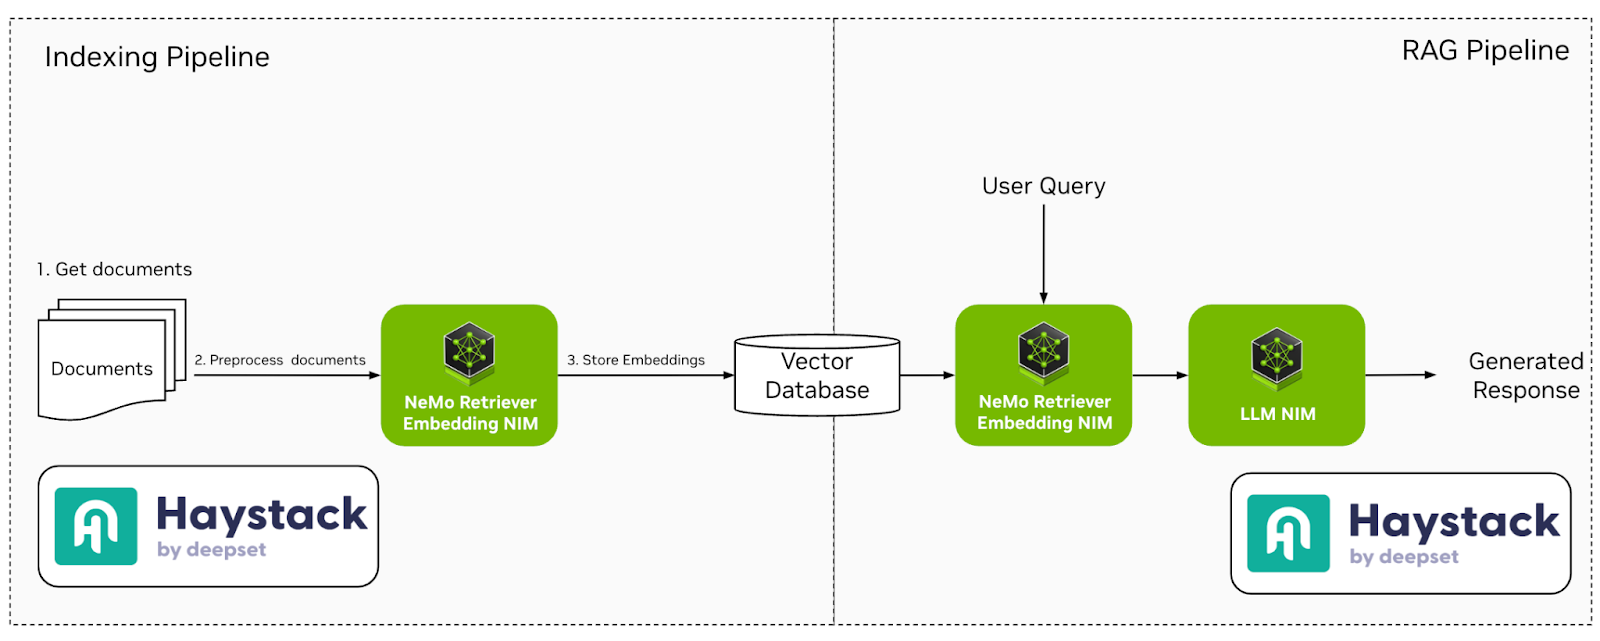 Figure 2 -  Haystack Indexing and RAG pipeline with NVIDIA NIMs